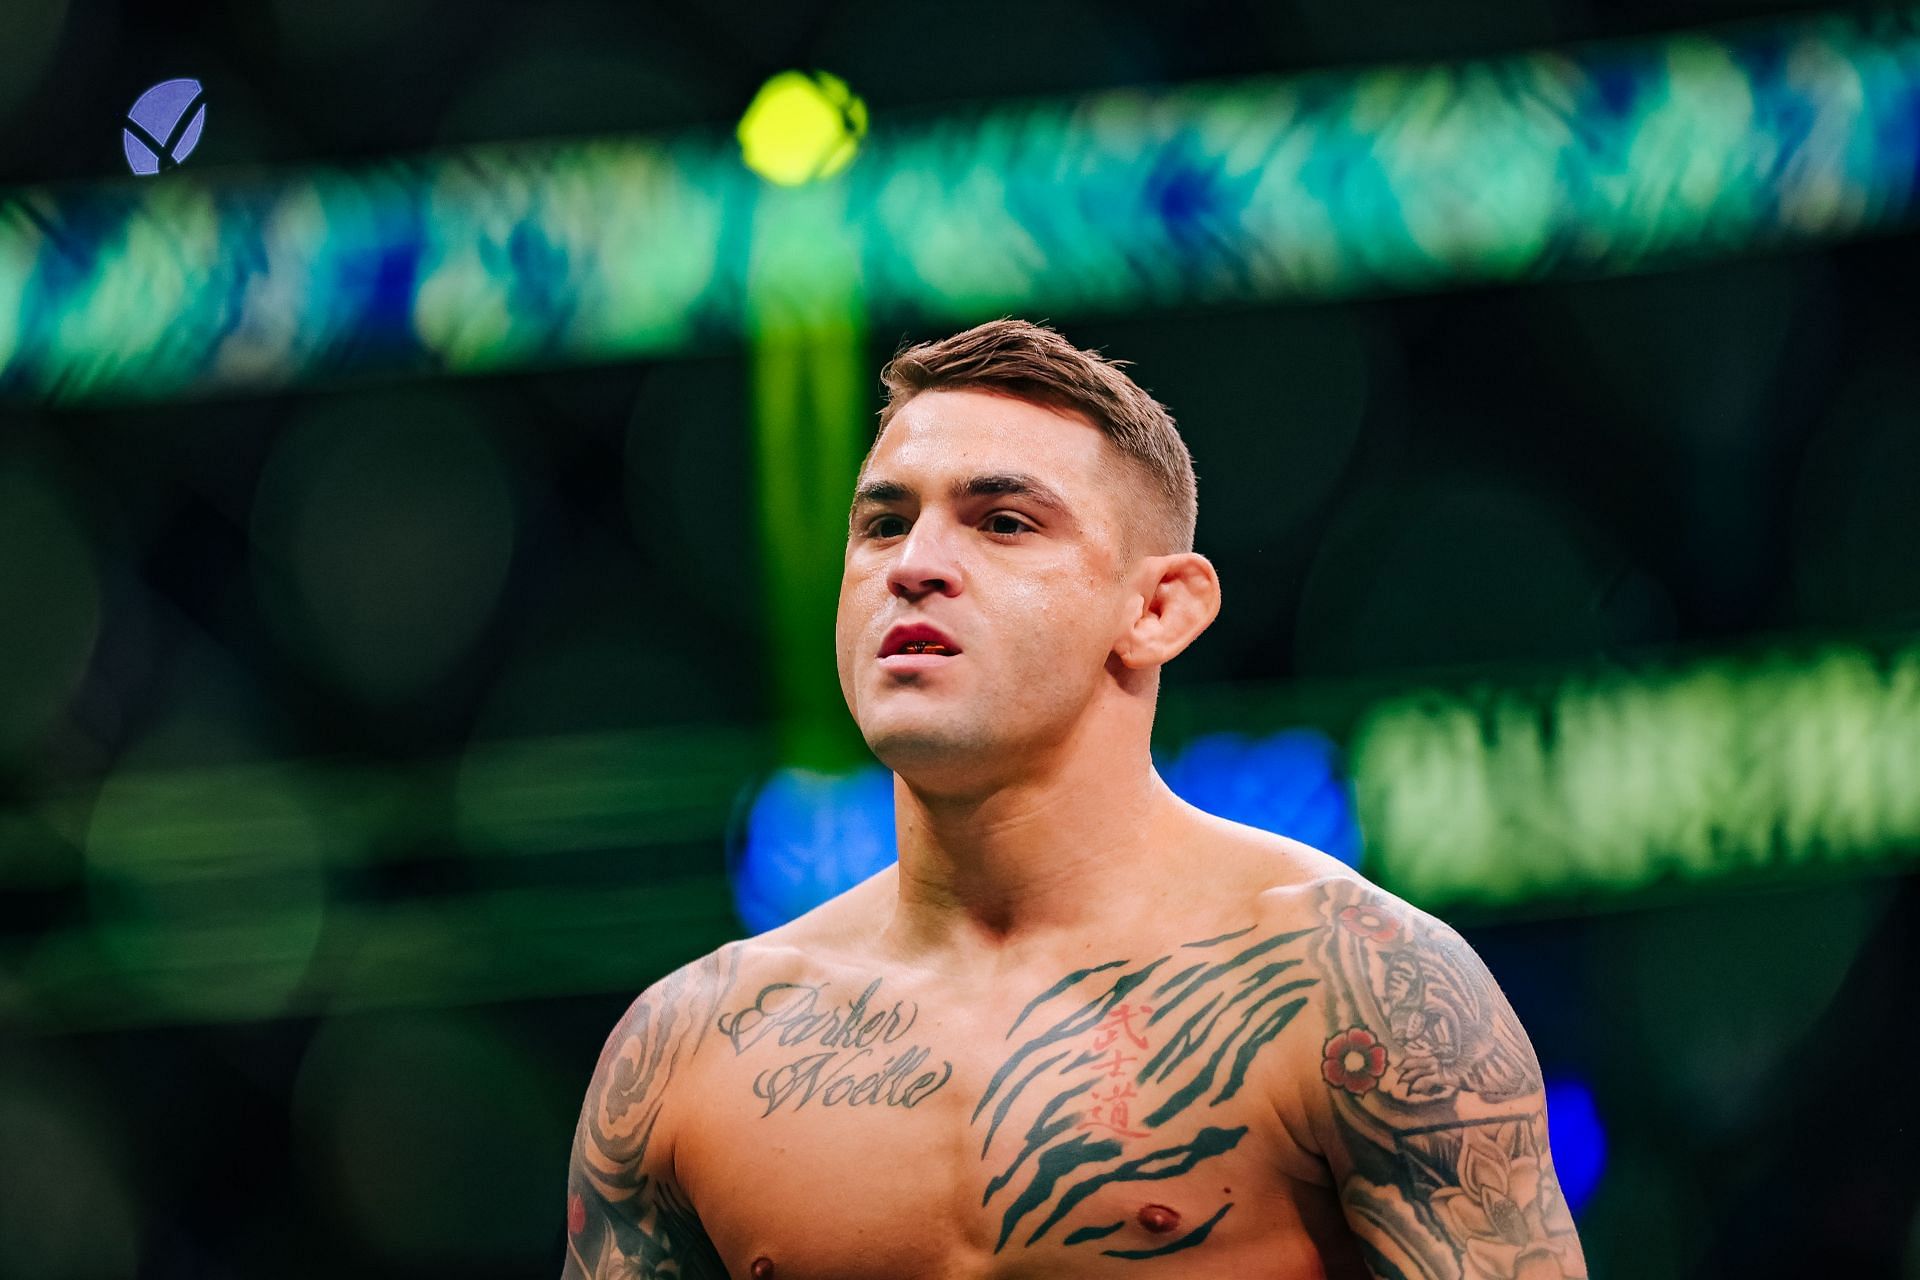 Dustin Poirier ahead of his fight against Charles Oliveira at UFC 269